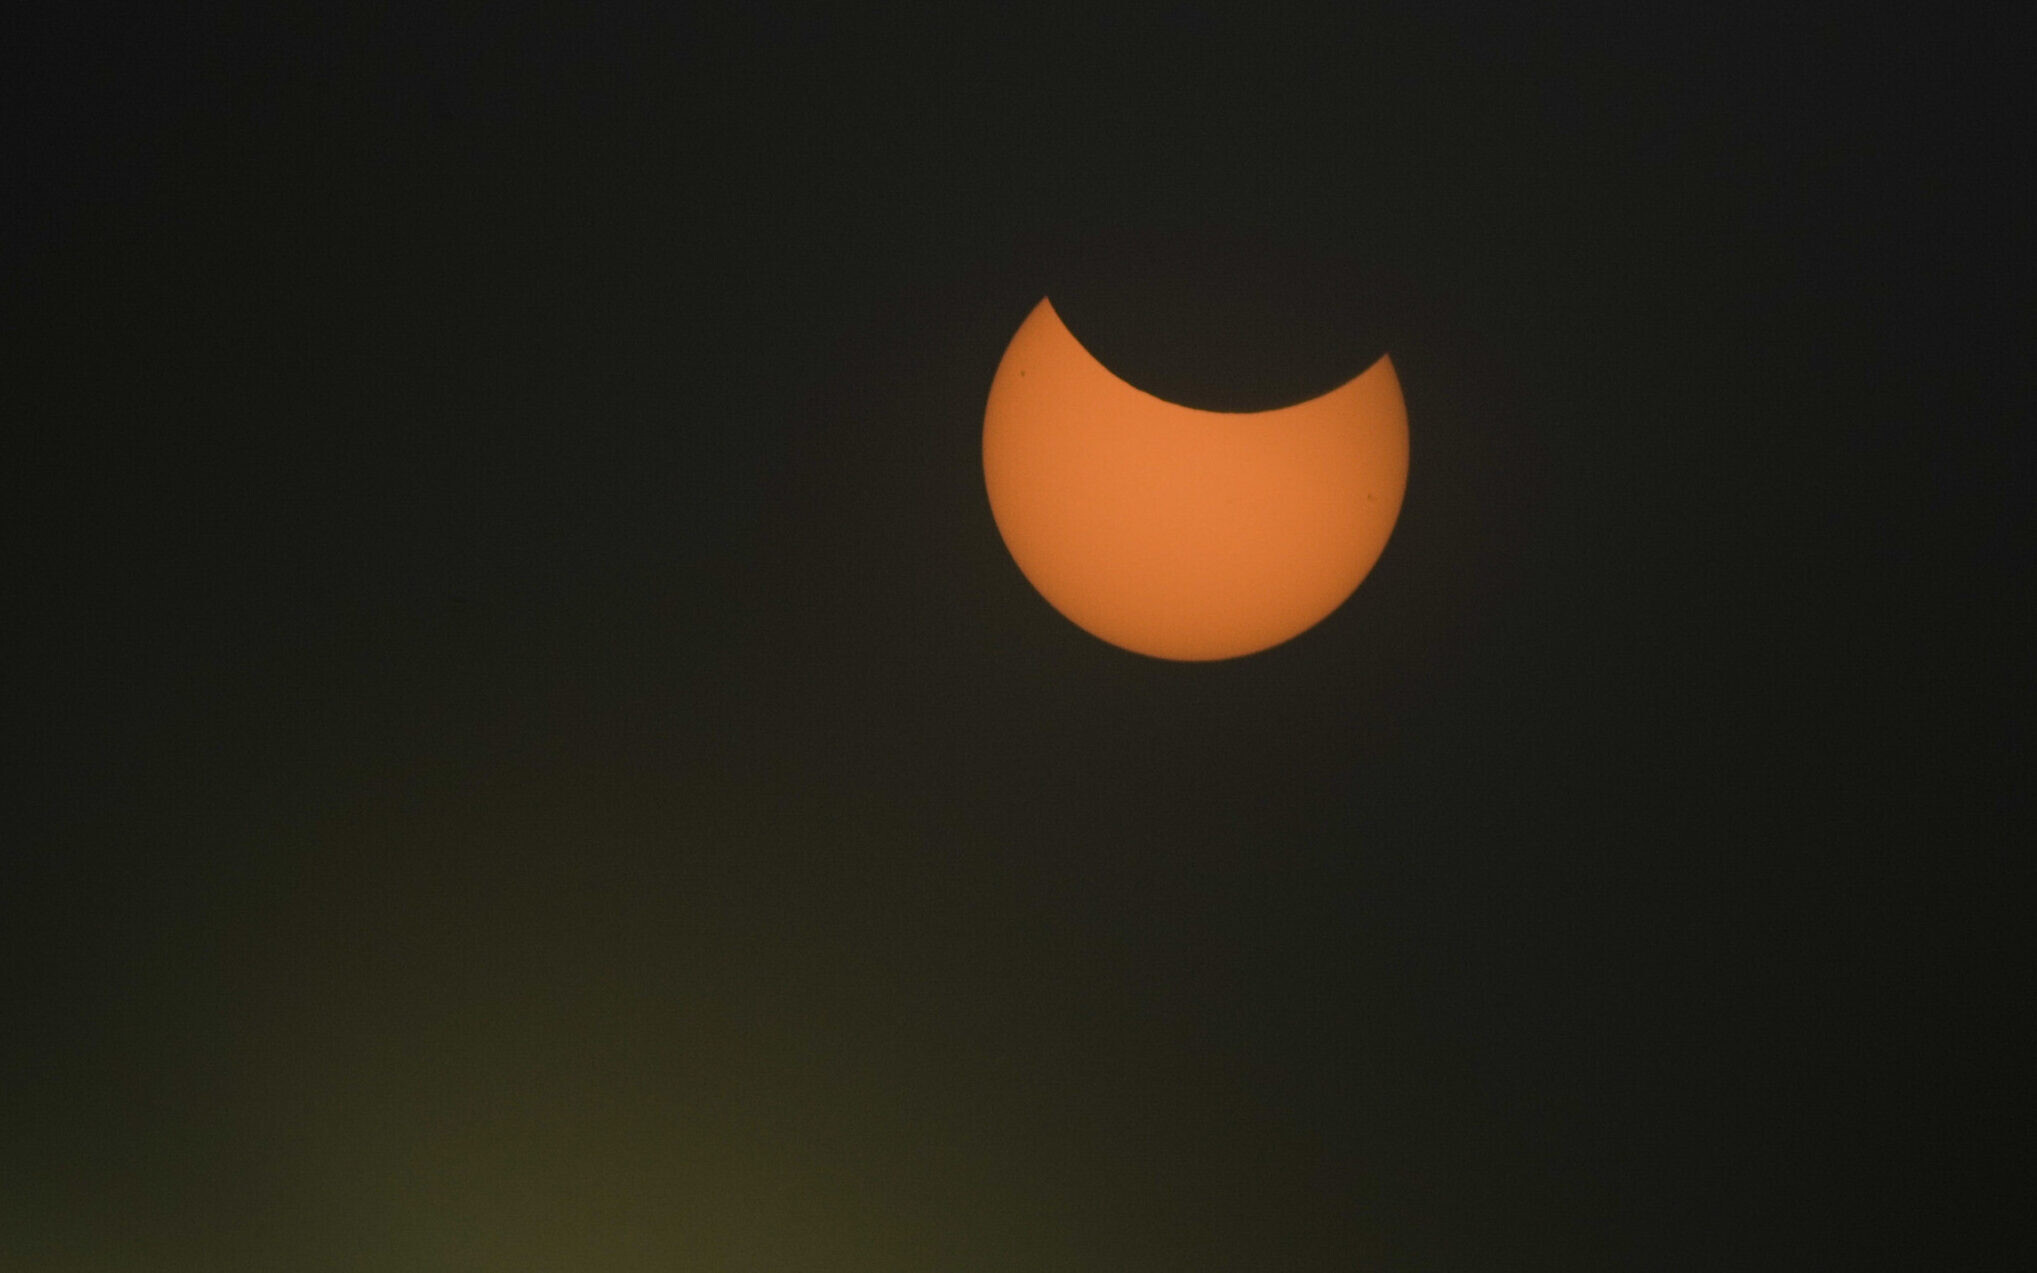 partial eclipse of the sun 2022